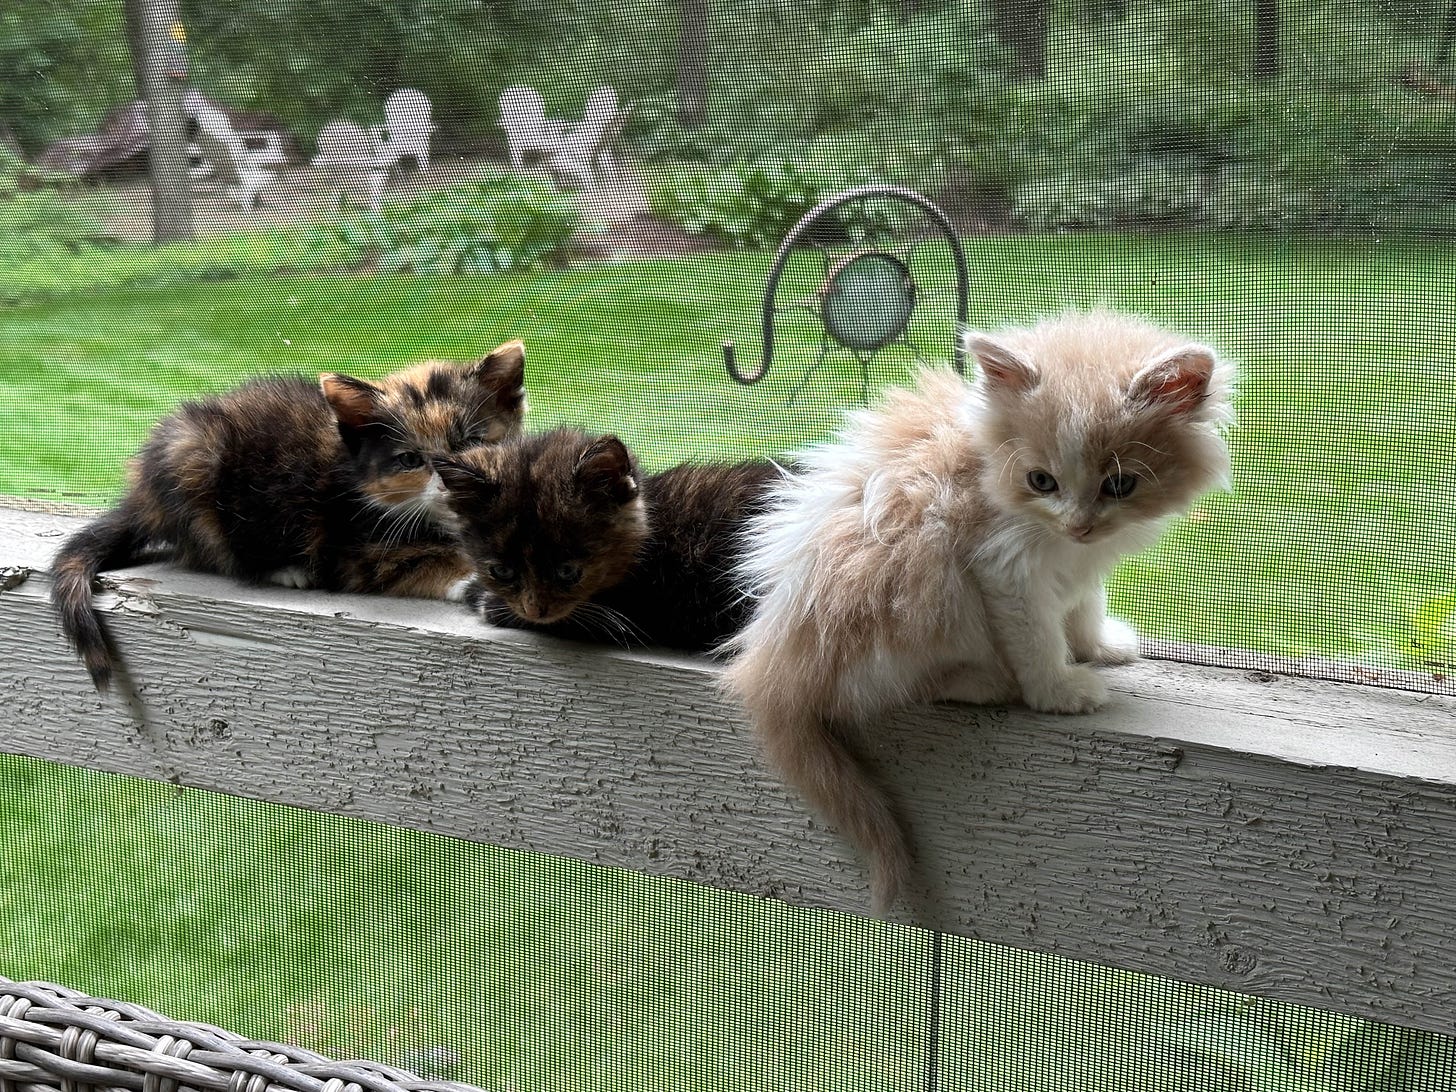 Kittens, two calico and one ginger, huddled on wooden ledge in screen porch with green backyard in background.